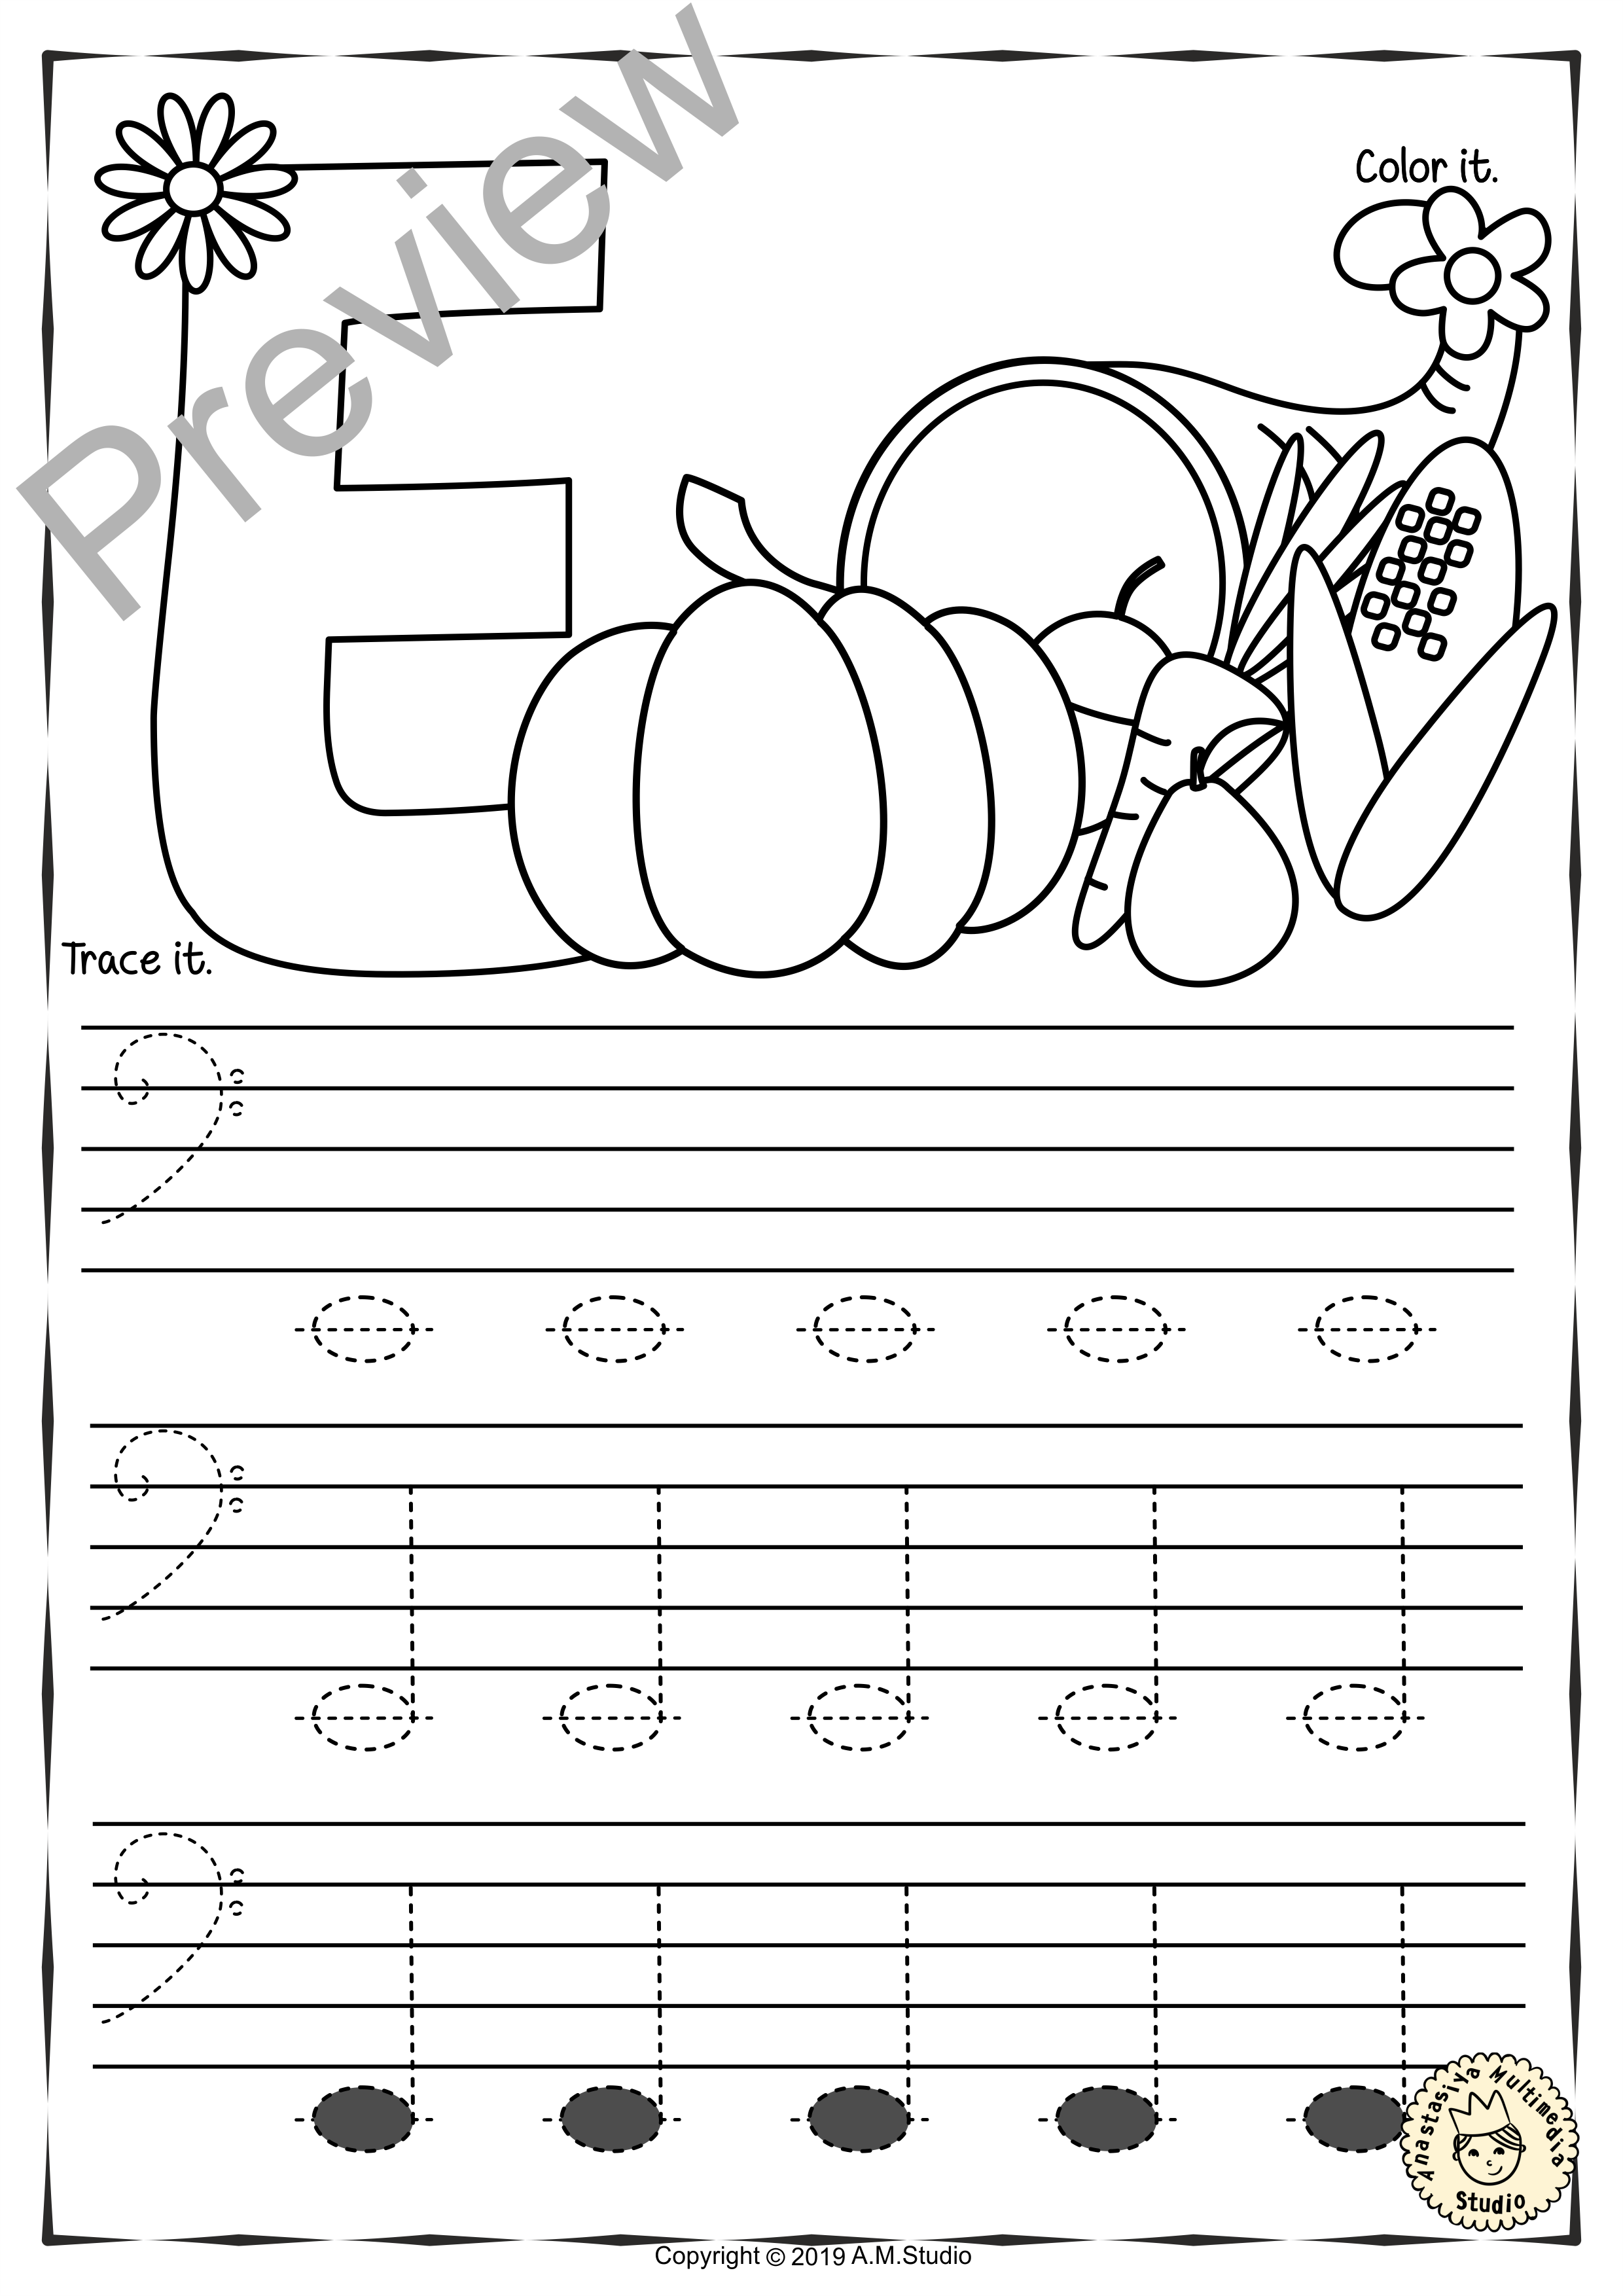 Bass Clef Tracing Music Notes Worksheets for Fall (img # 1)